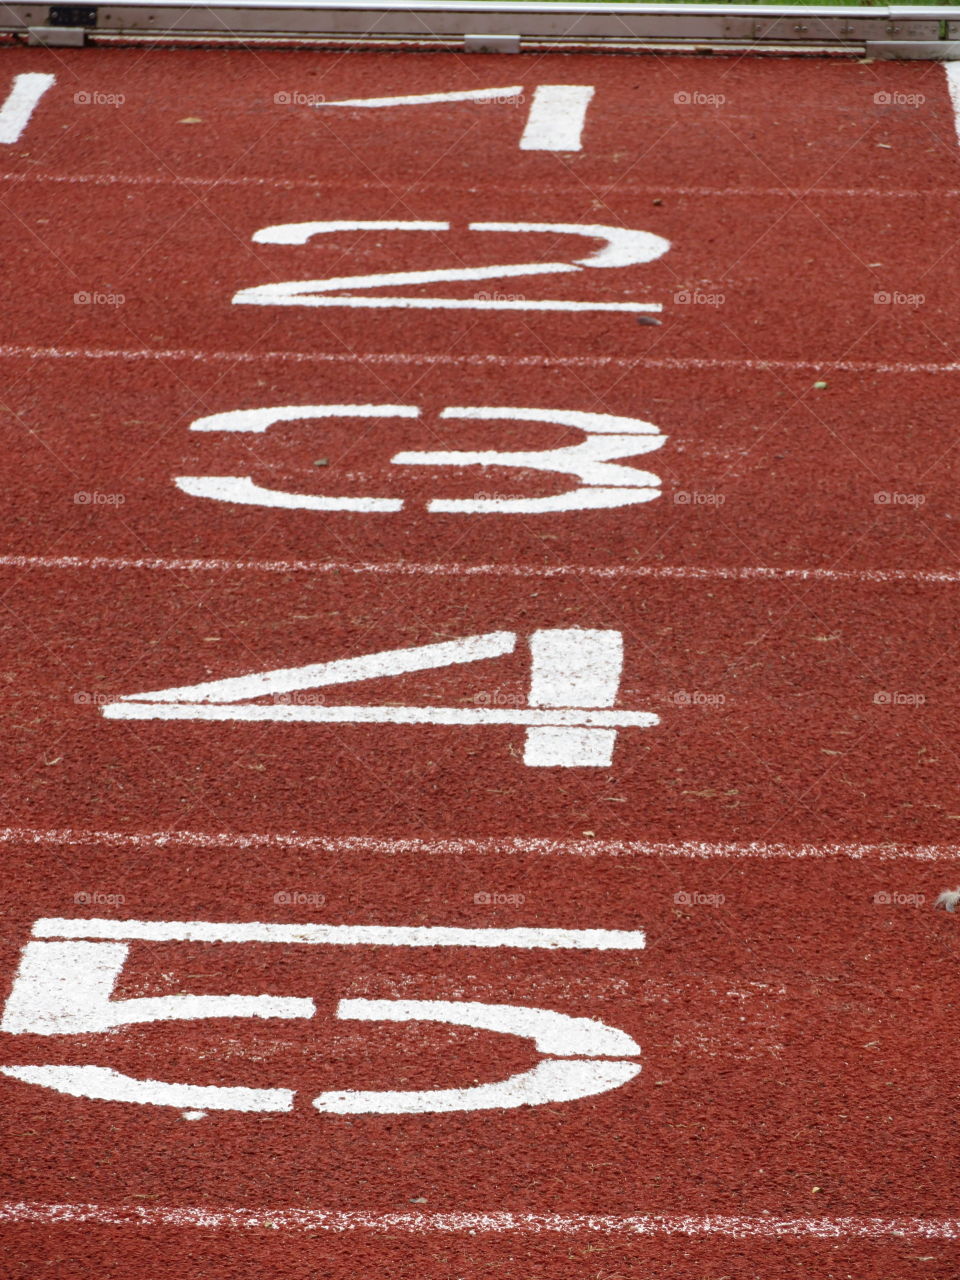 track and field numbers